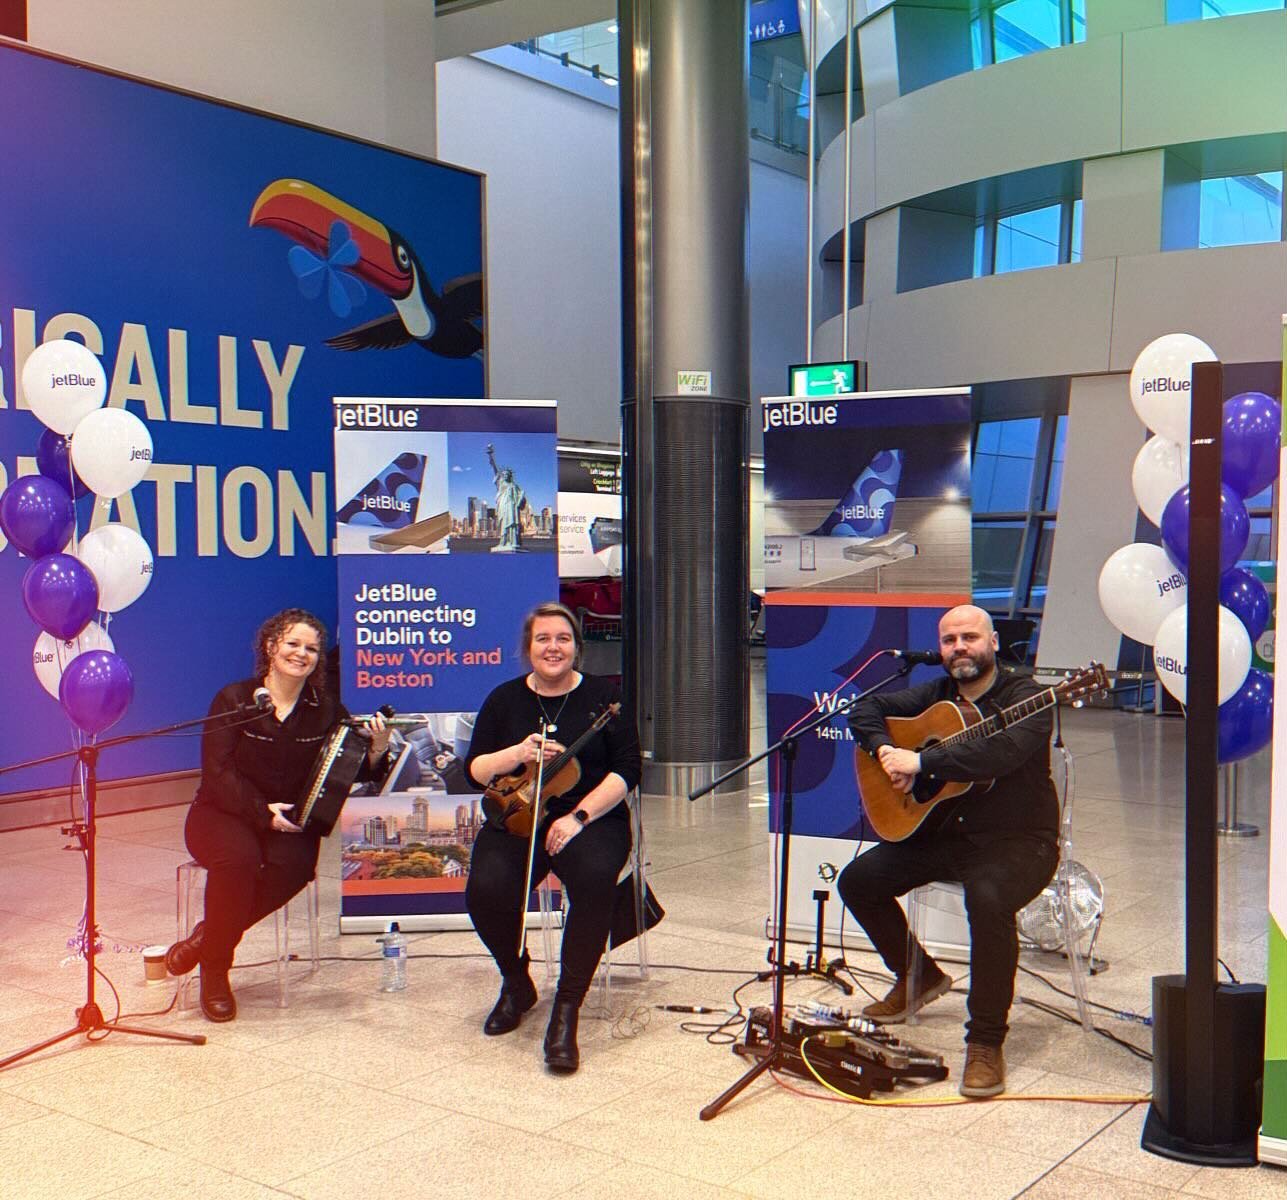 Early morning #irishwelcome for the launch of #jetblue with @clairesherrymusic @eoghanscott @caoimherua ☘️👏☘️👏☘️✈️ 

@dublinairport @jetblue @seagency1